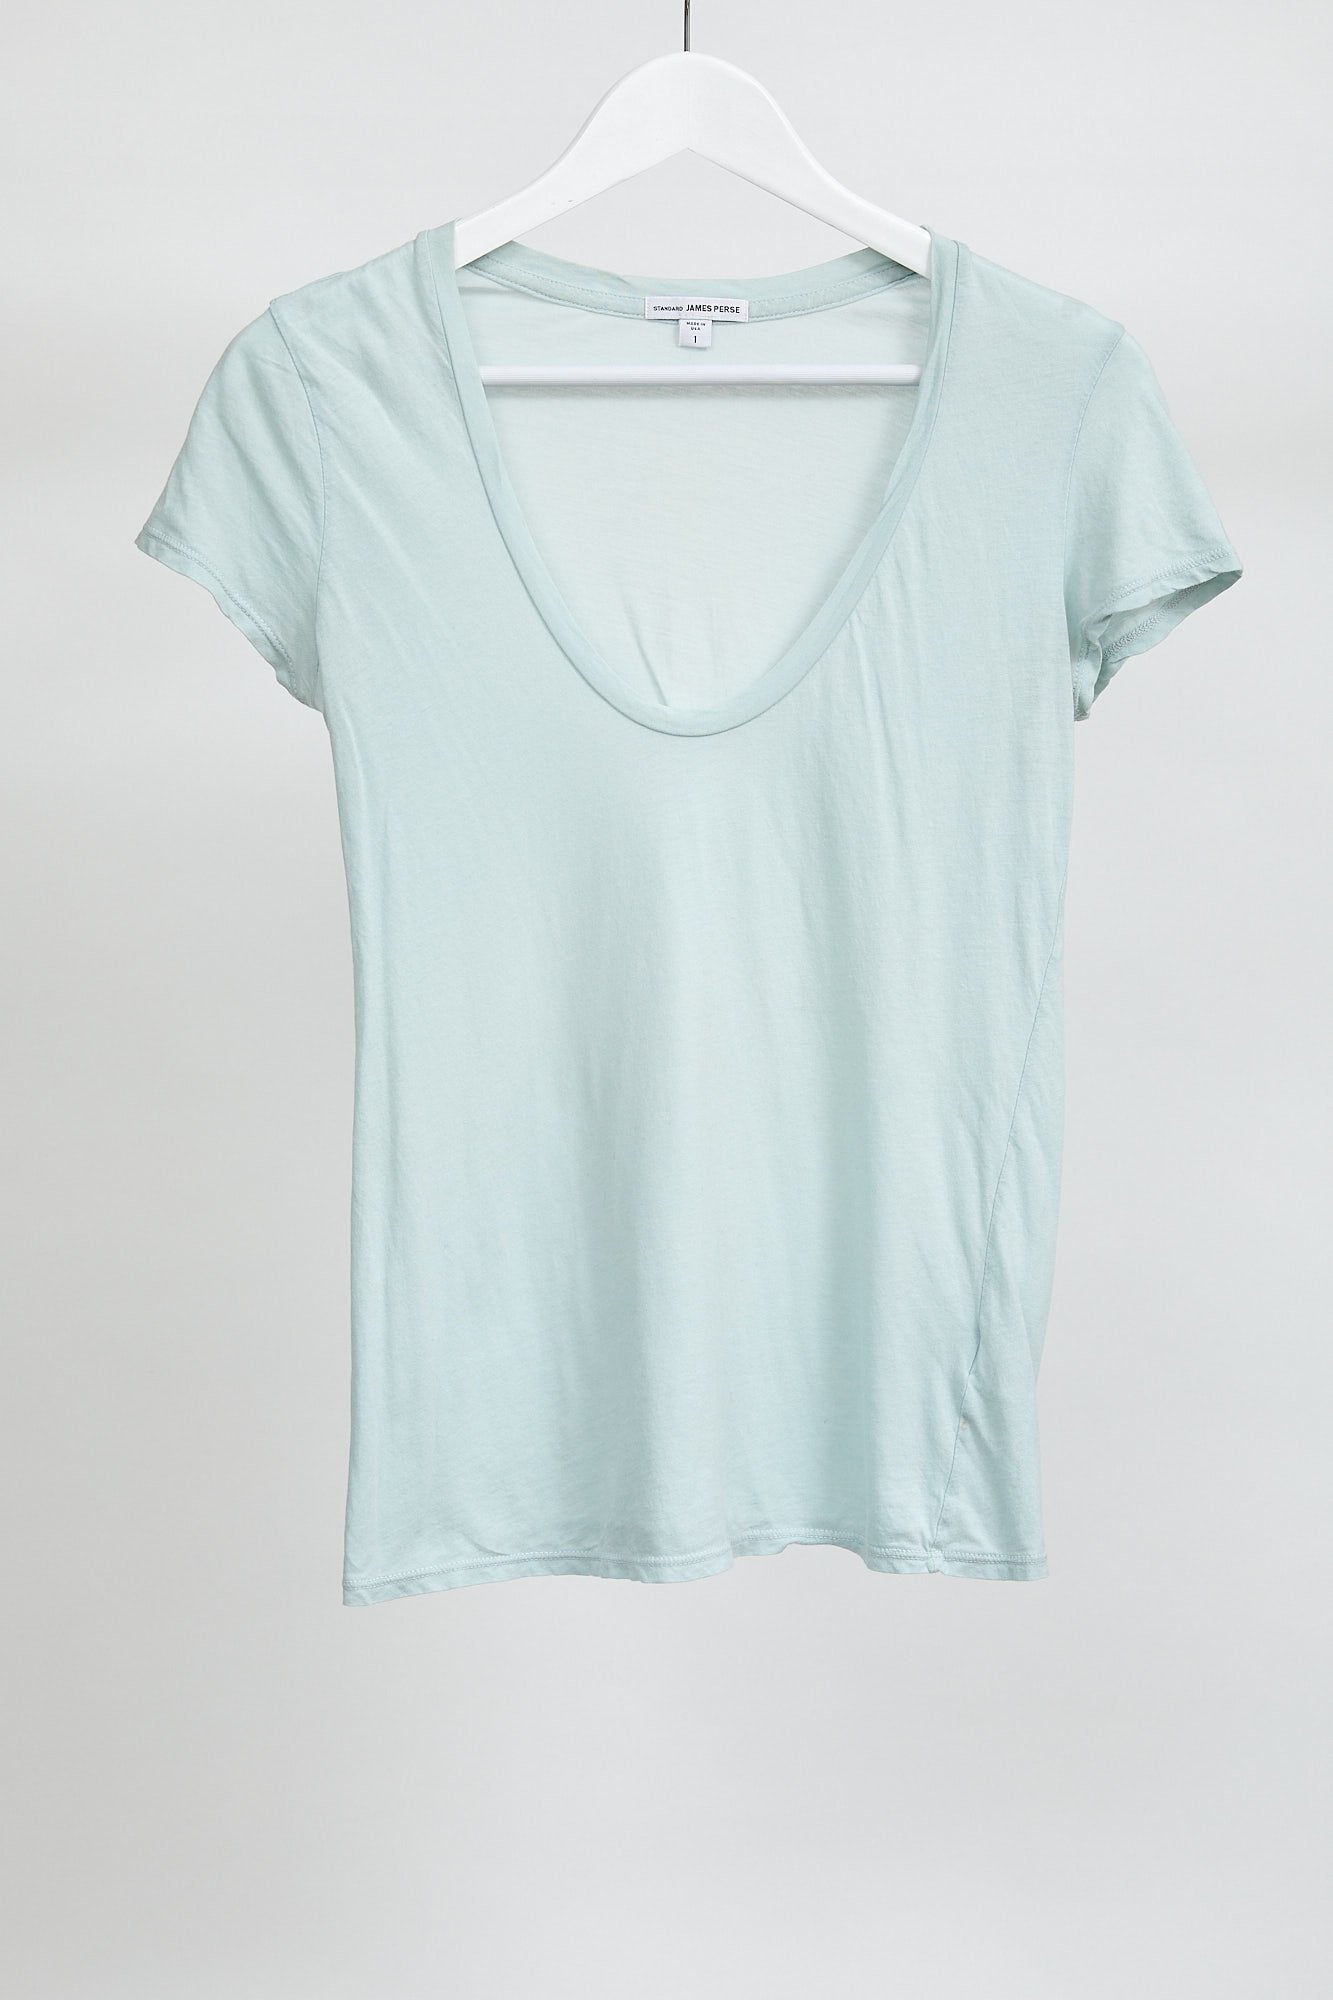 Womens Pale Blue Short Sleeve T-Shirt: Size Small